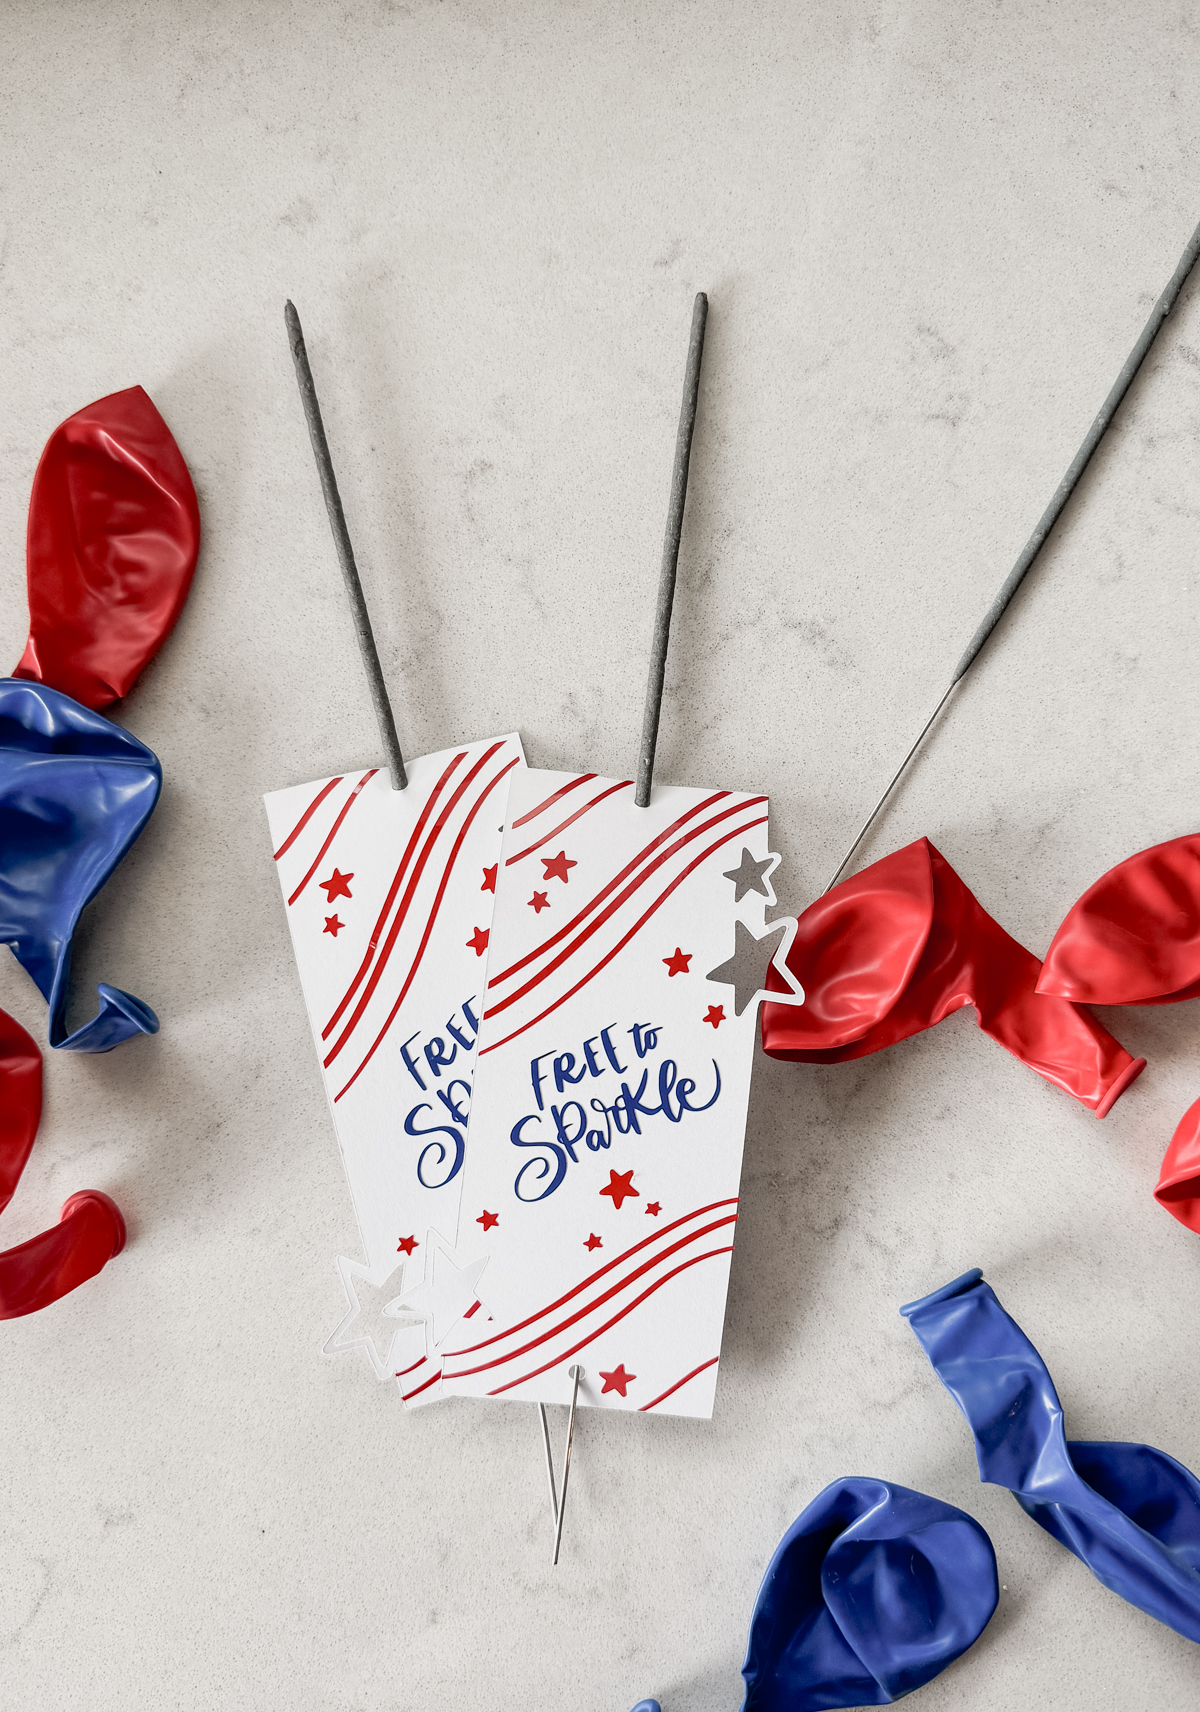 image of fourth of july sparklers holders free svg file with 3 layers, shown assembled with sparklers on countertop with red and blue balloons